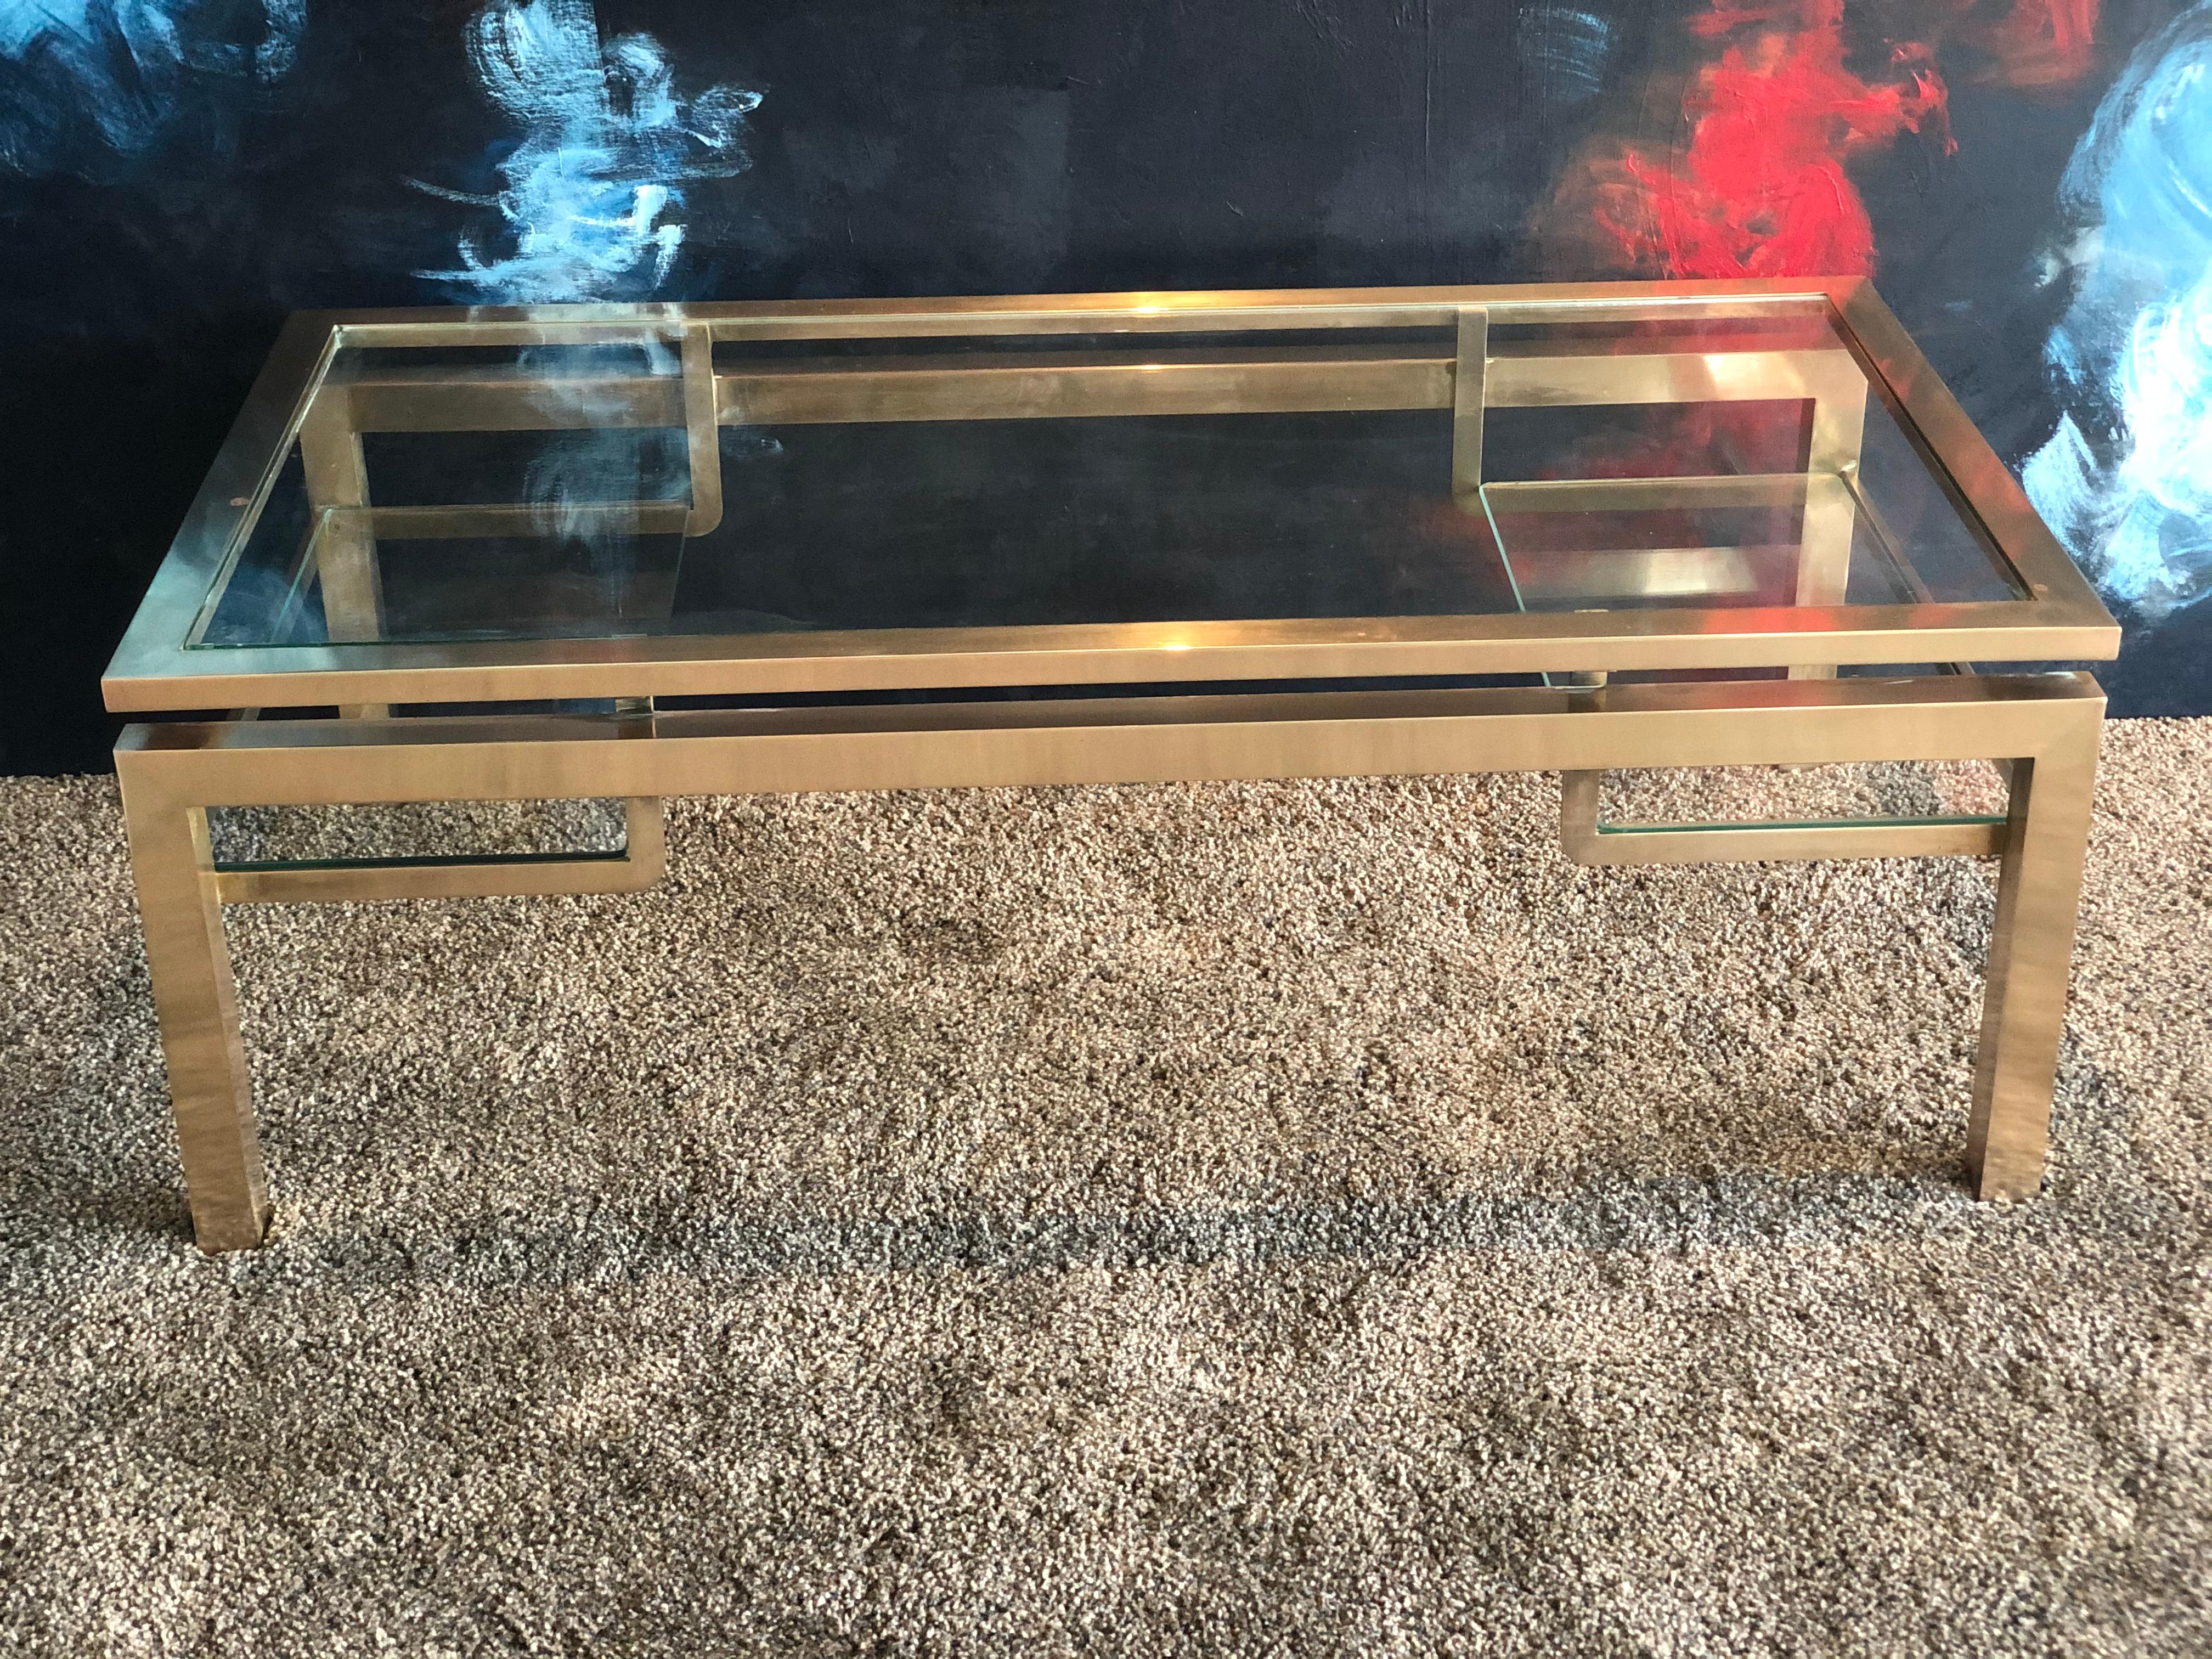 Rectangular brass coffee table by Guy Lefevre for Maison Jansen published in the 1970s. Two shelves in good condition. Measures: Length 127, width 67, height 38.